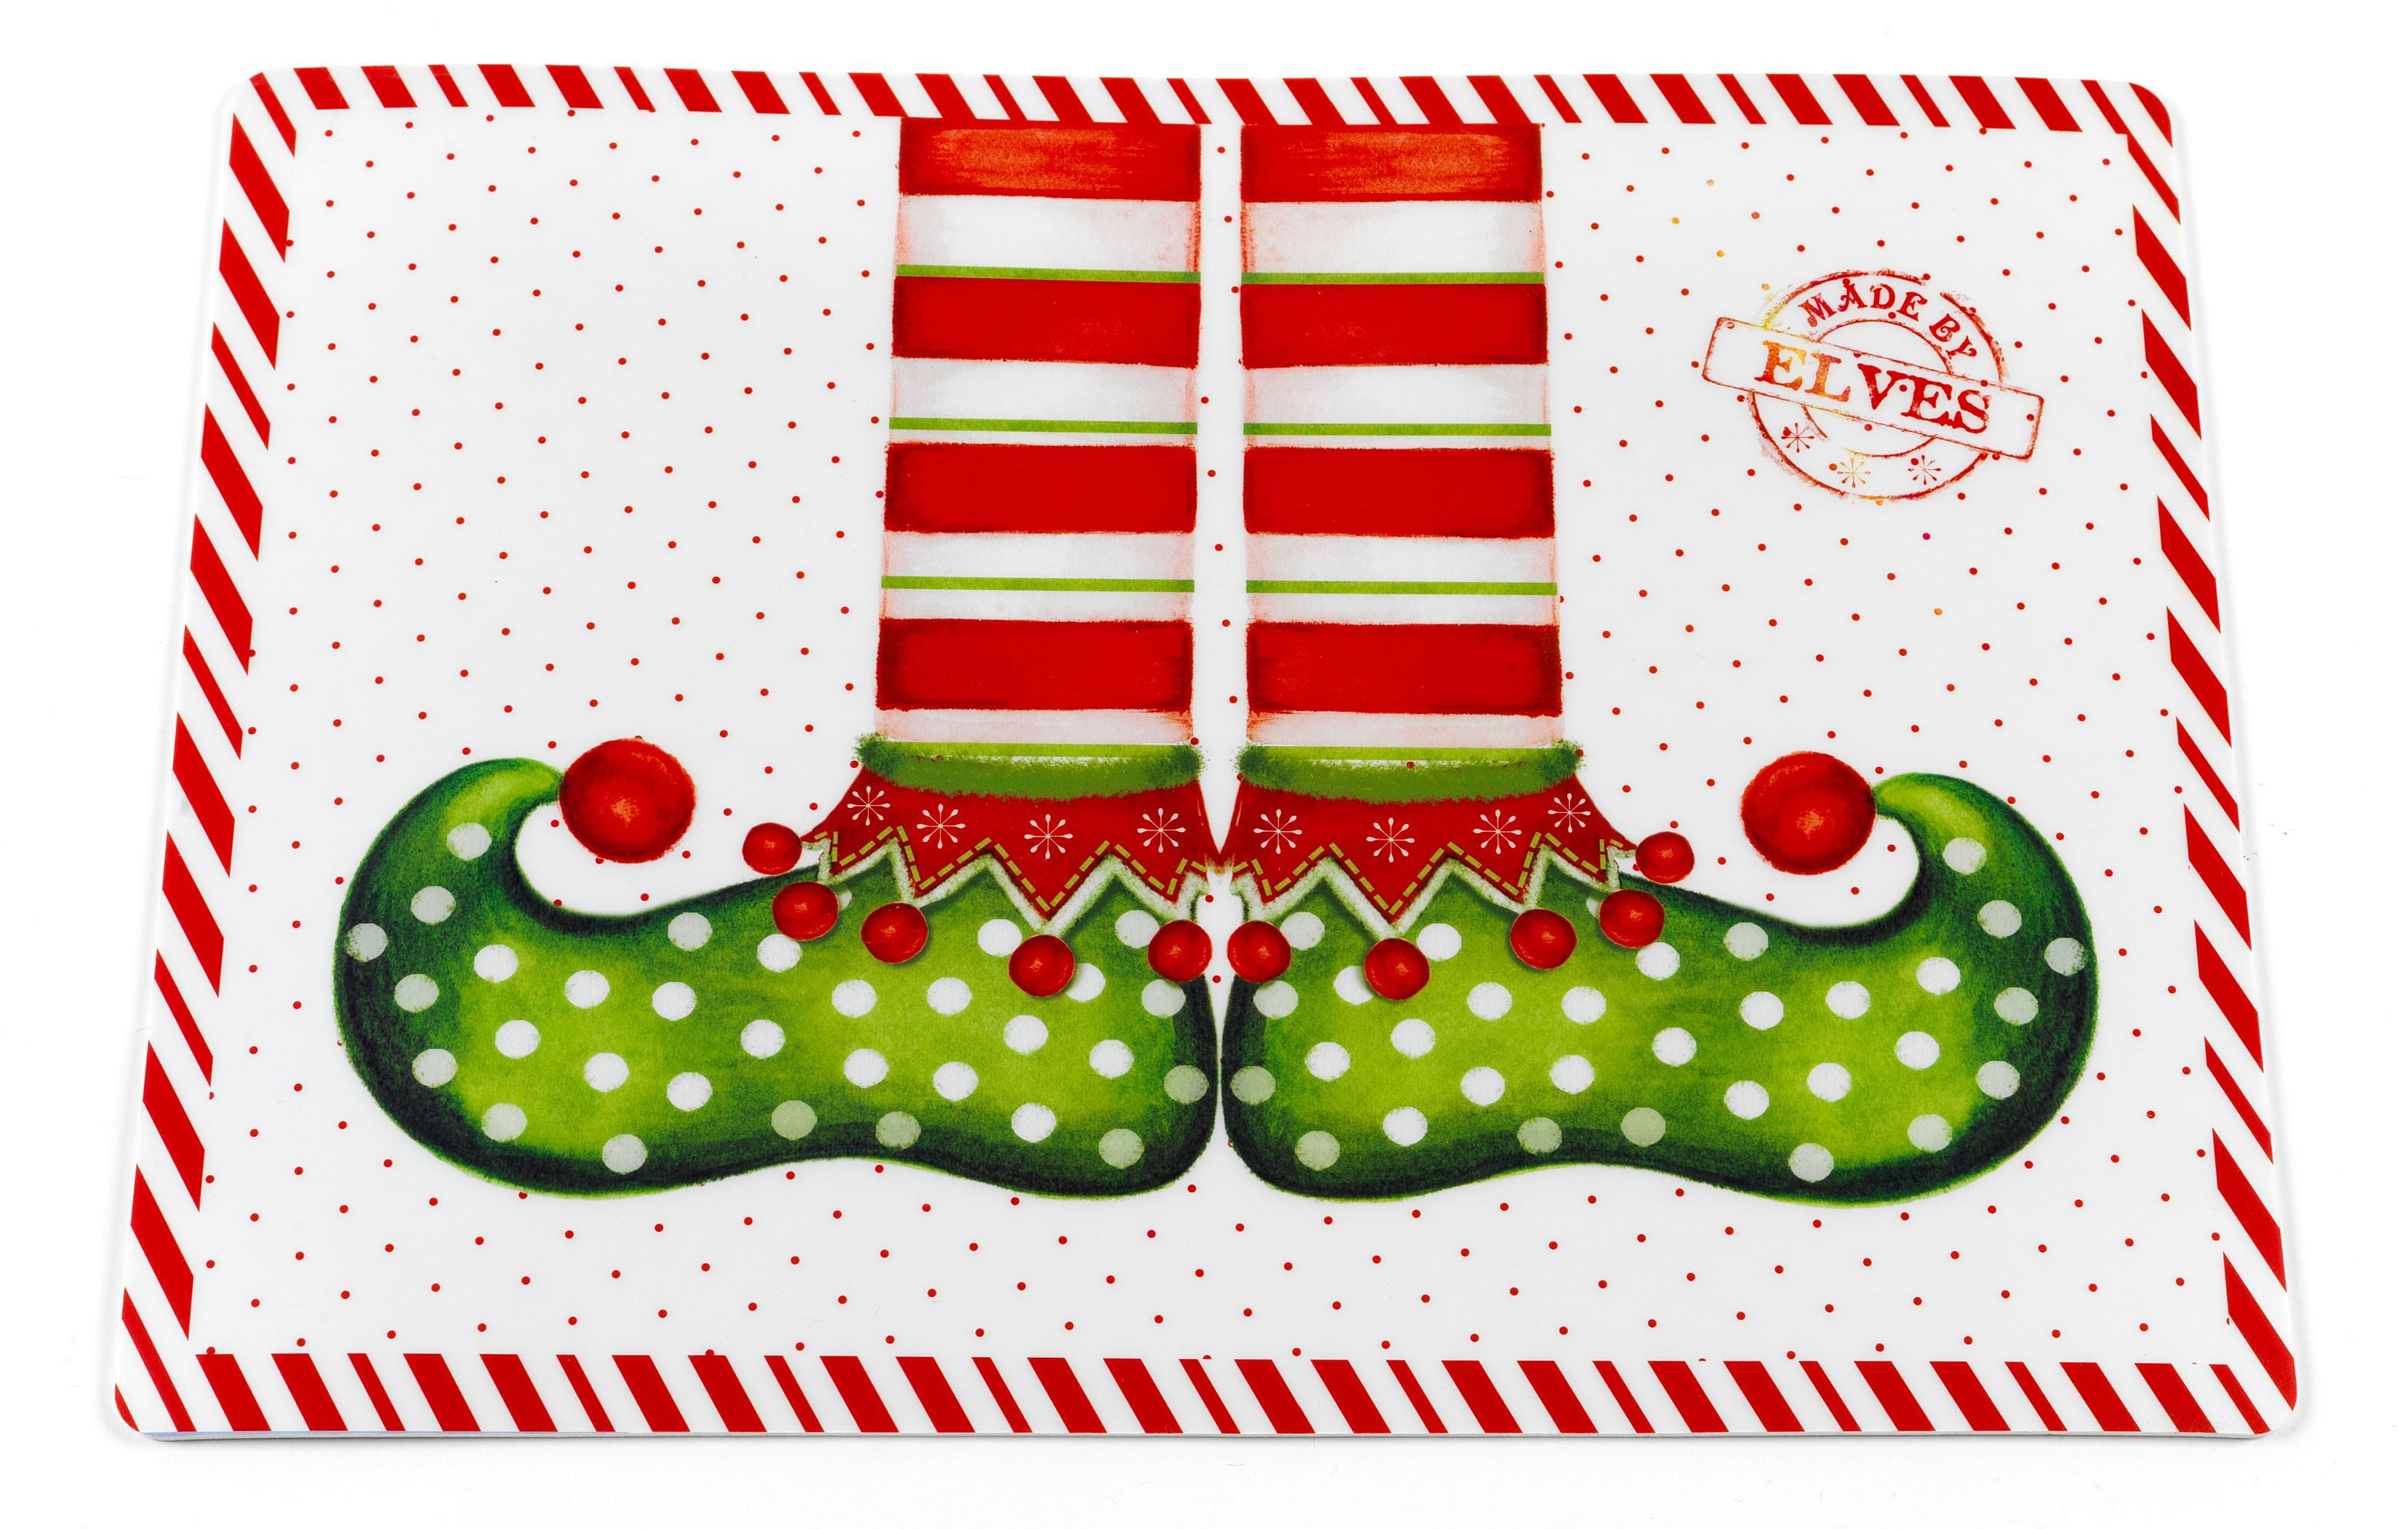 2 REVERSIBLE NON CLEAR HARD PLASTIC PLACEMATS,12" x 18" CHRISTMAS ELVES CA 